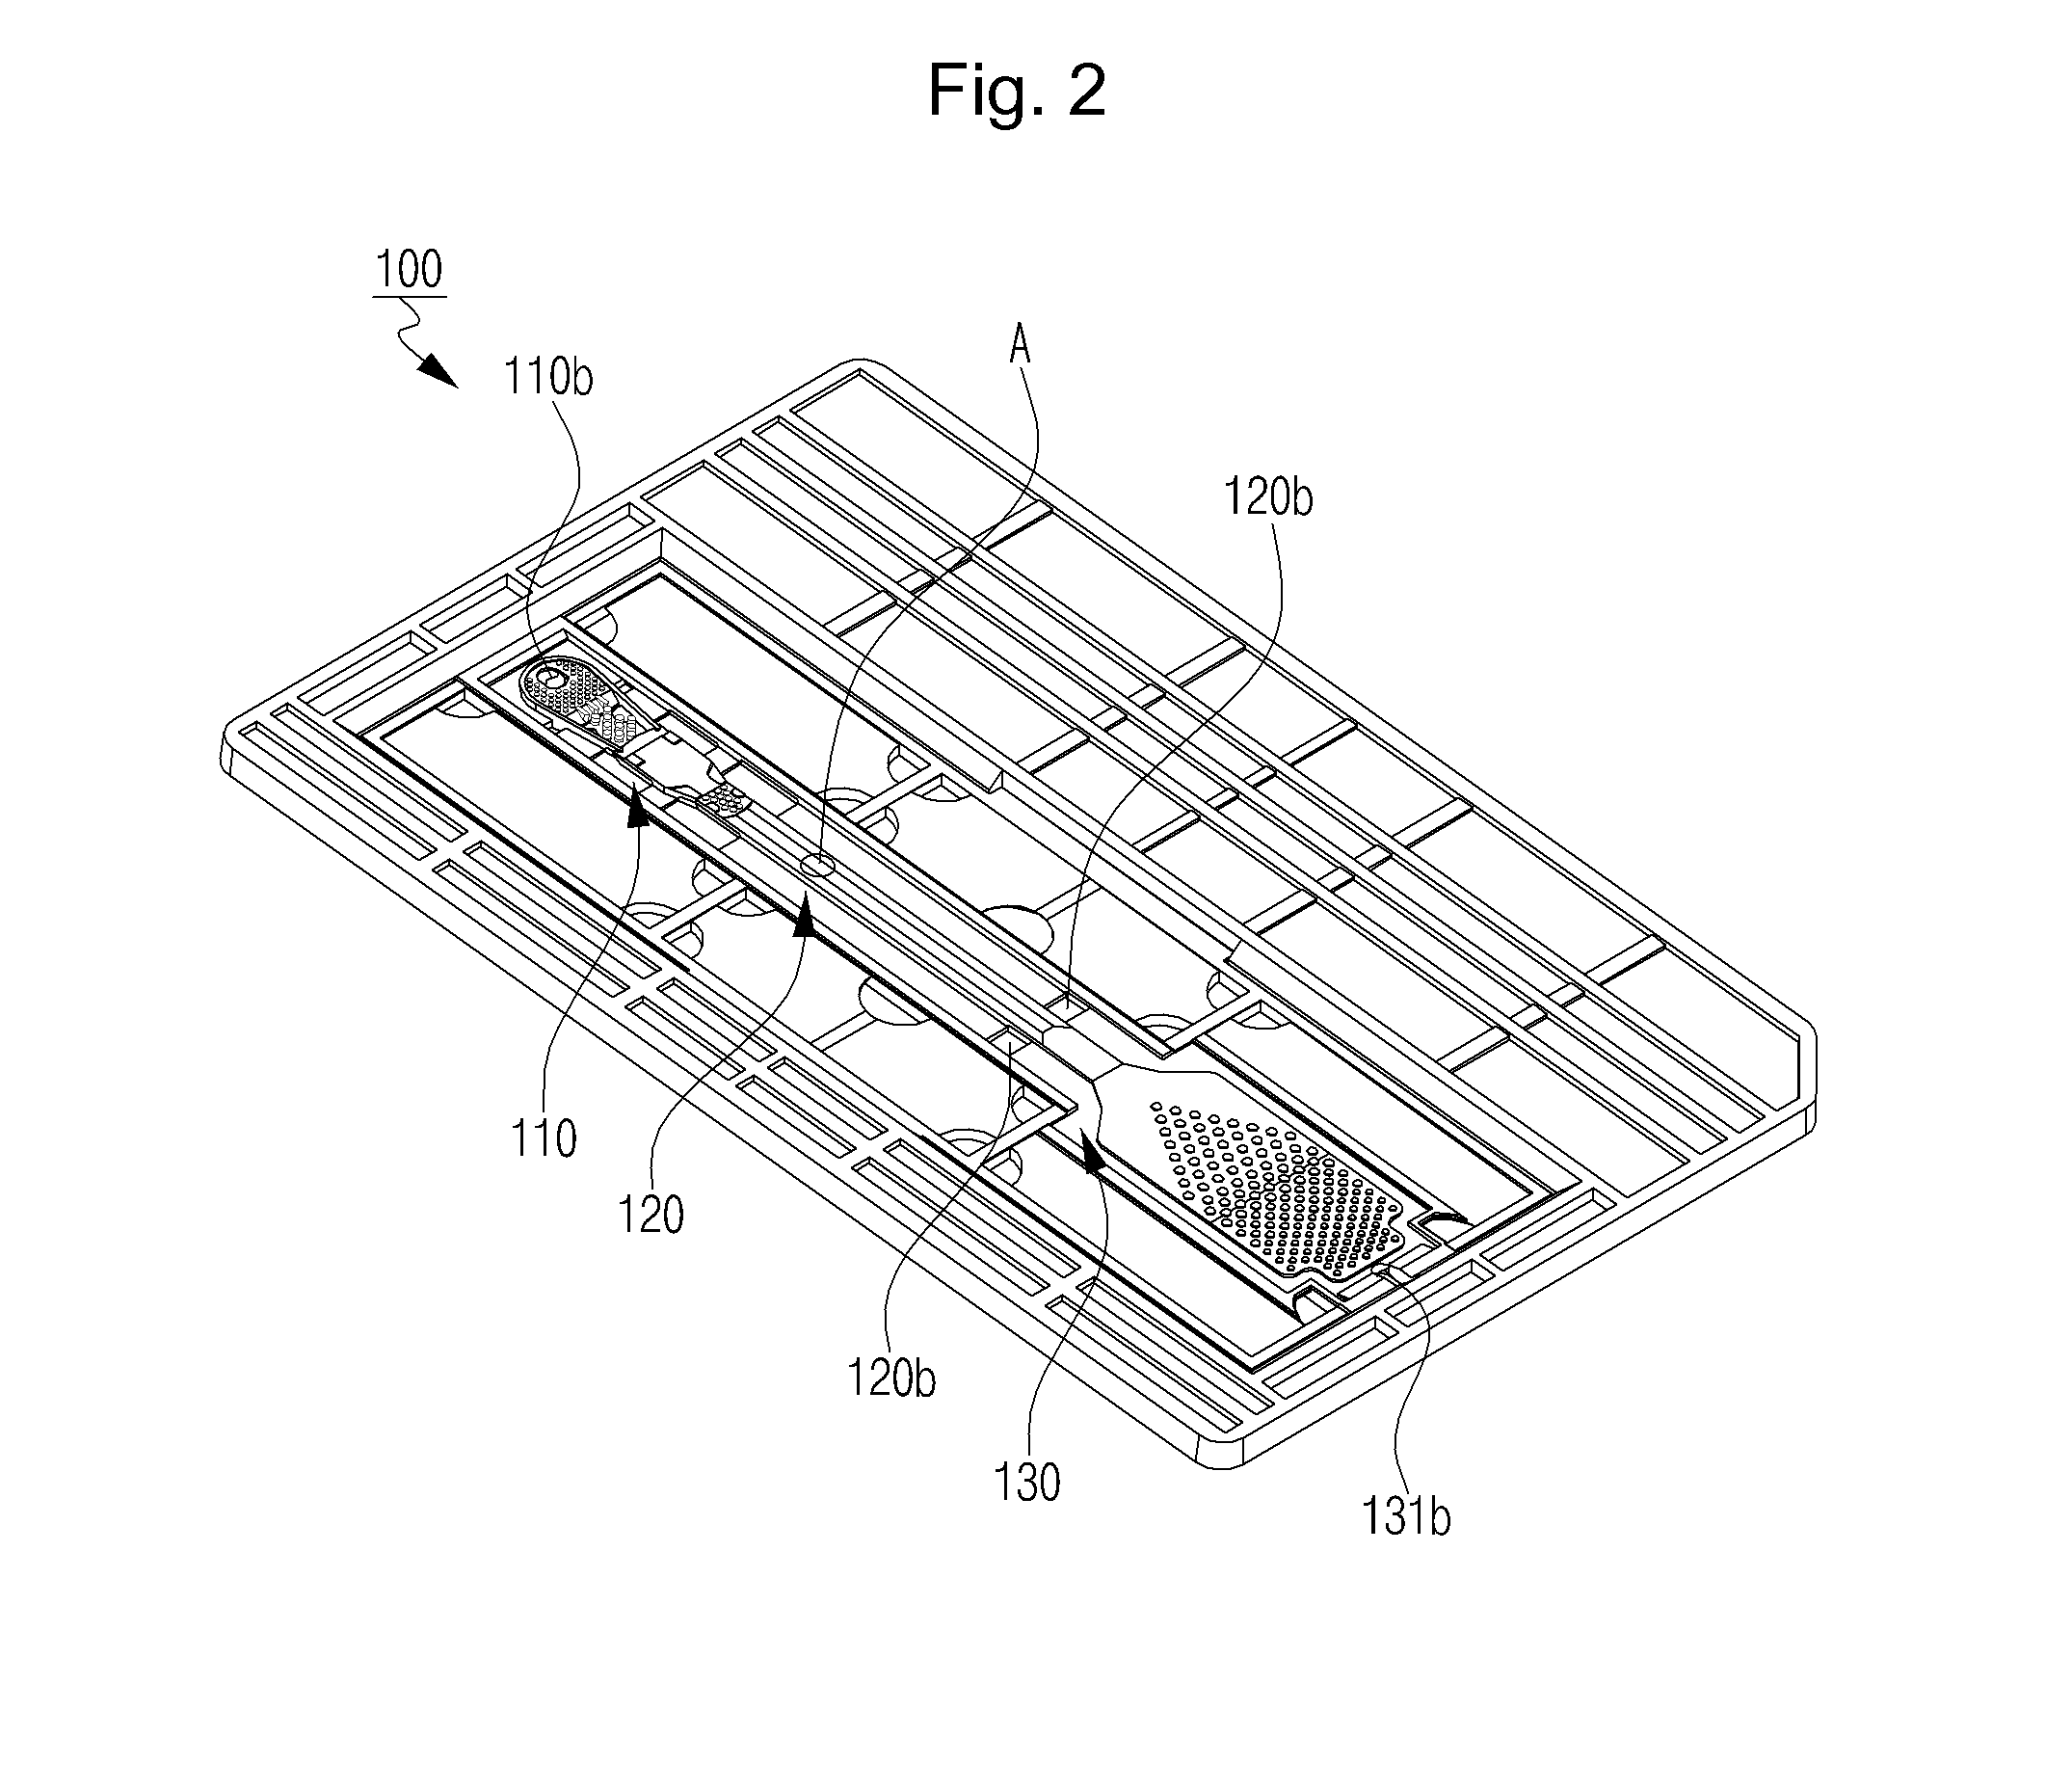 Chip for analyzing fluids being moved without an outside power source